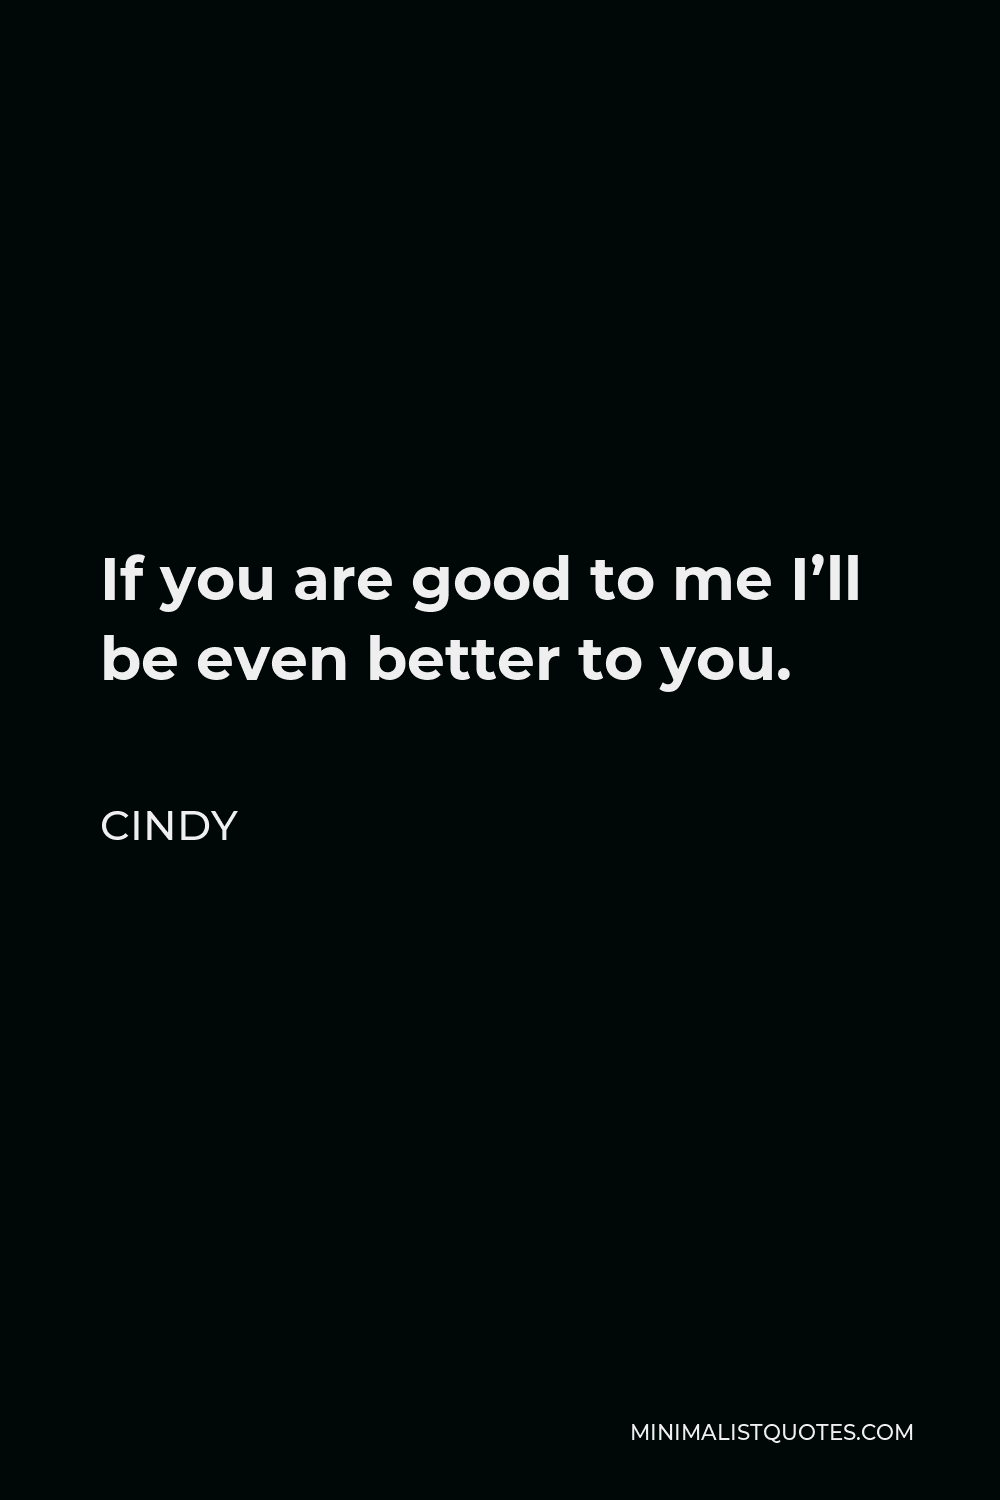 Cindy Quote - If you are good to me I’ll be even better to you.